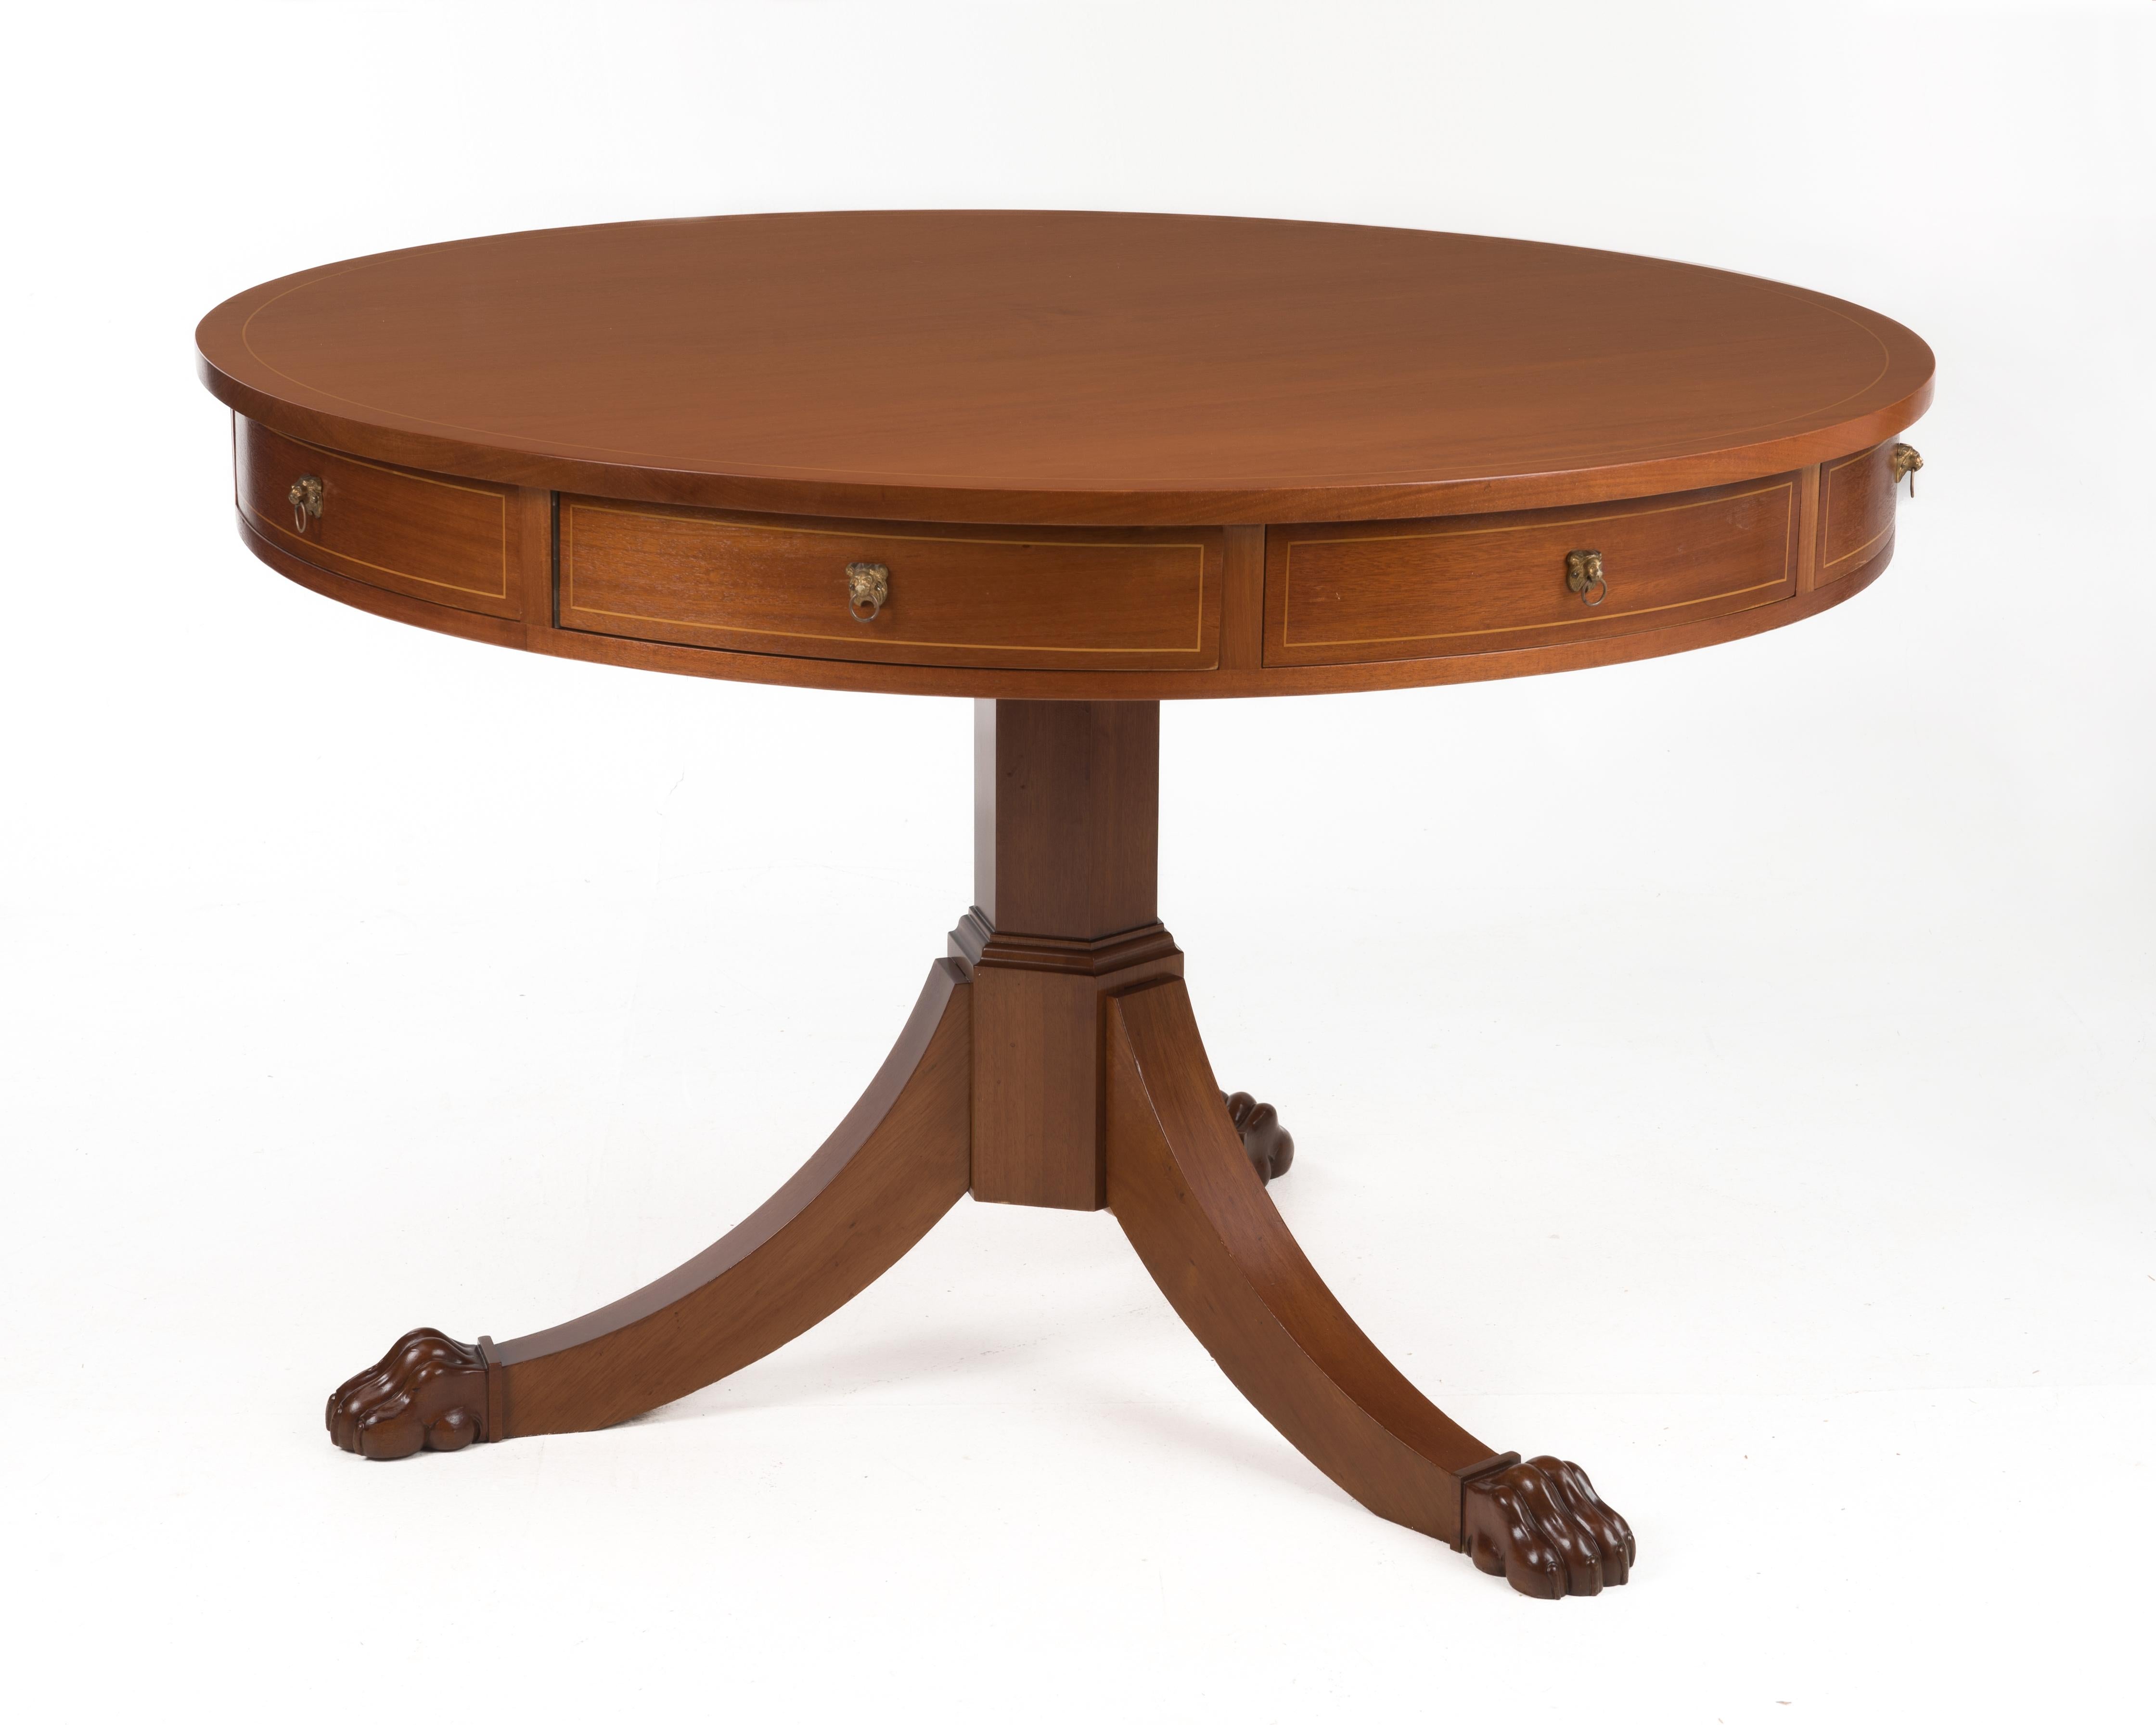 19th Century Regency Mahogany Rotating Rent Table Regency Paw Feet In Good Condition For Sale In Forest Grove, PA